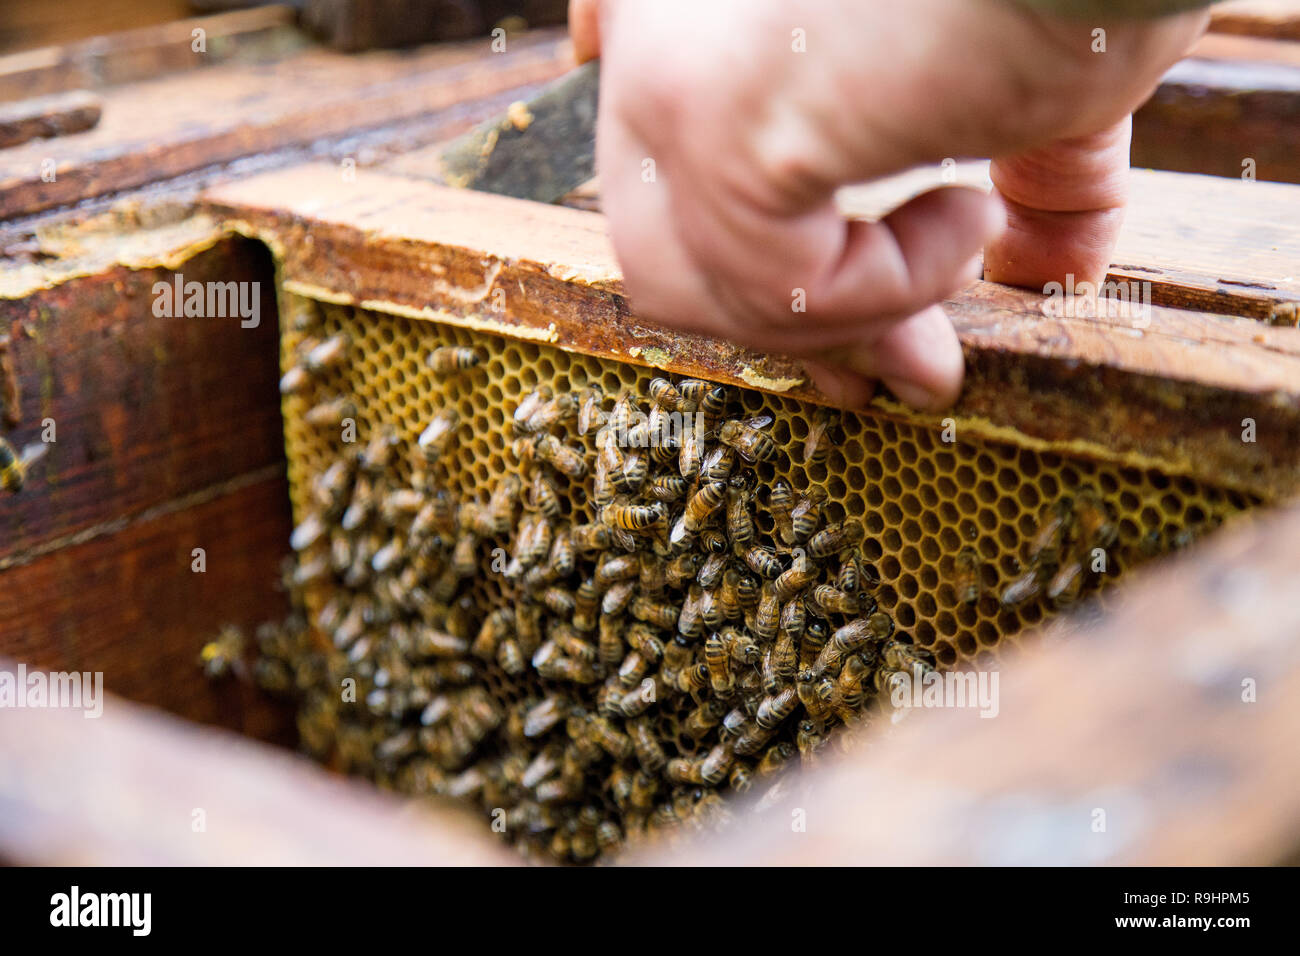 Beekeeper hands at work on his apiary with honeycomb by the beehive Stock Photo